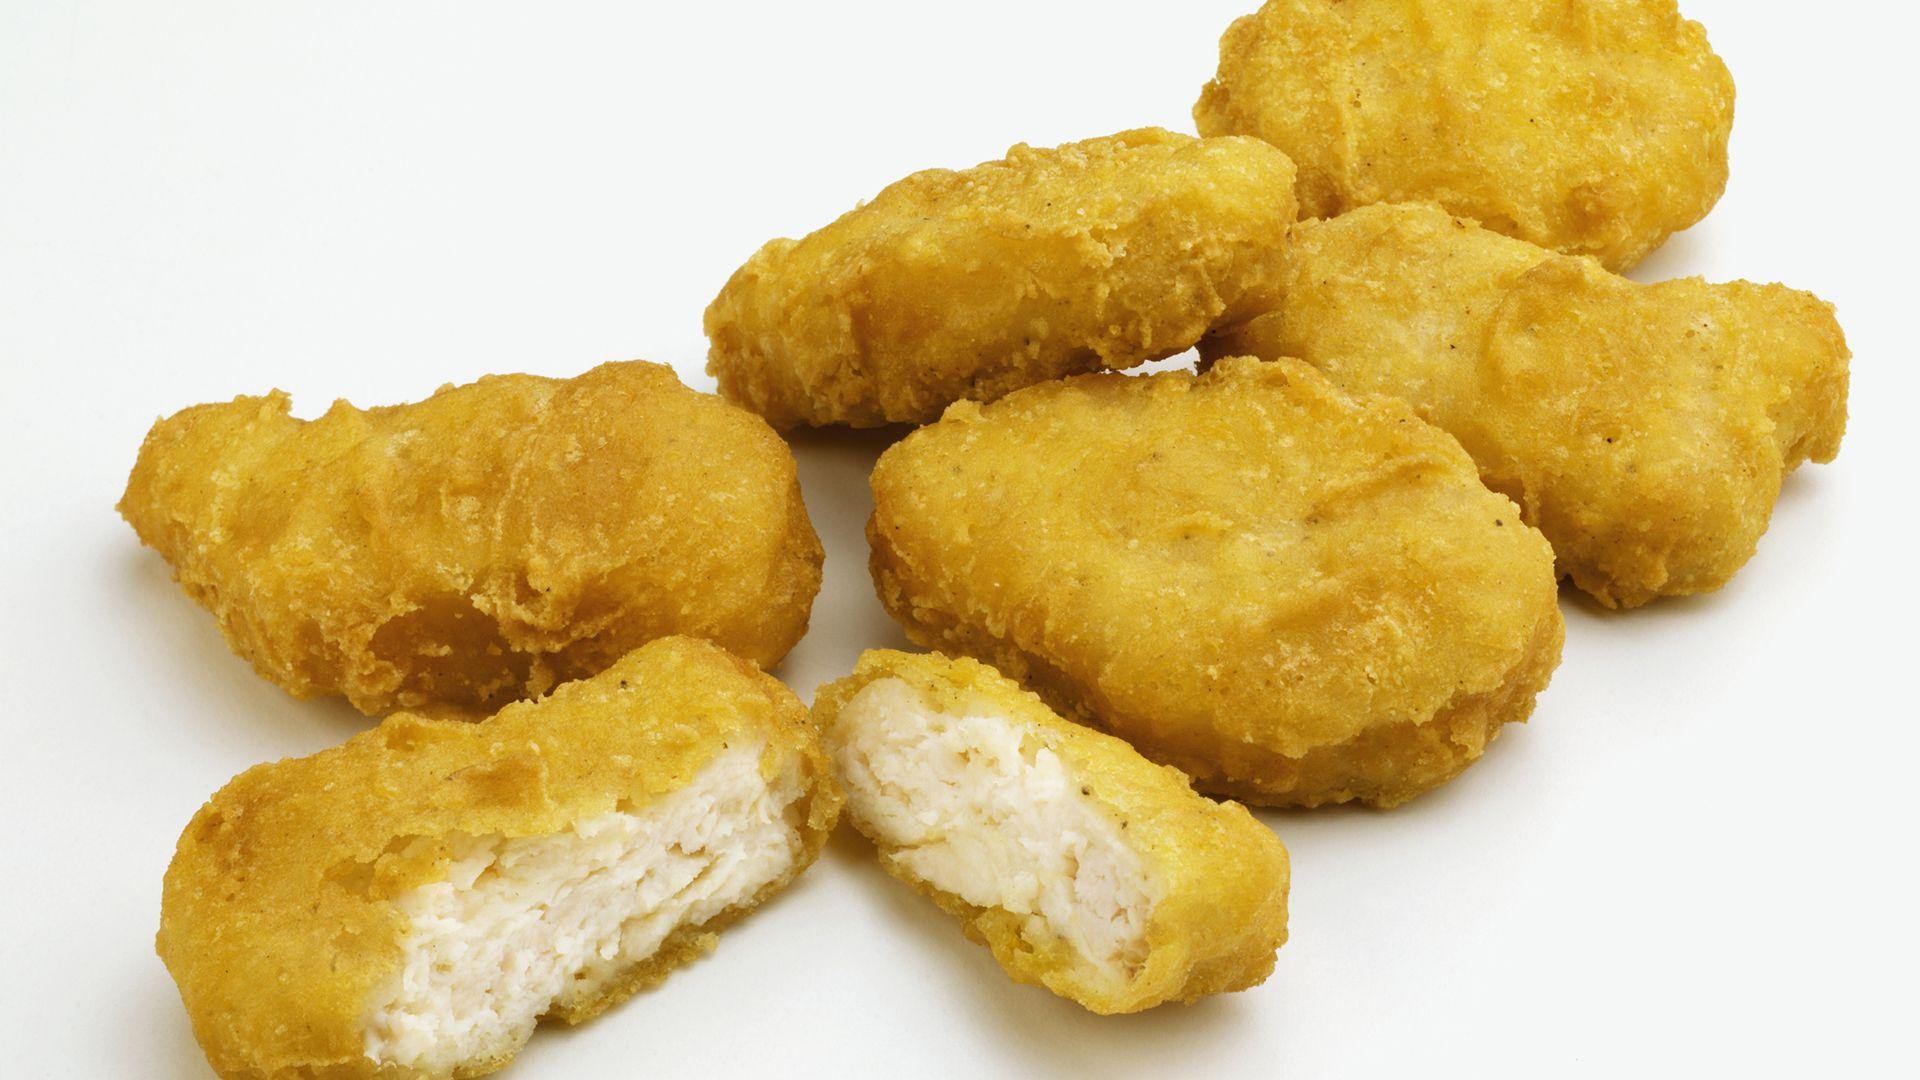 Nearly 1 million pounds of breaded chicken products recalled over